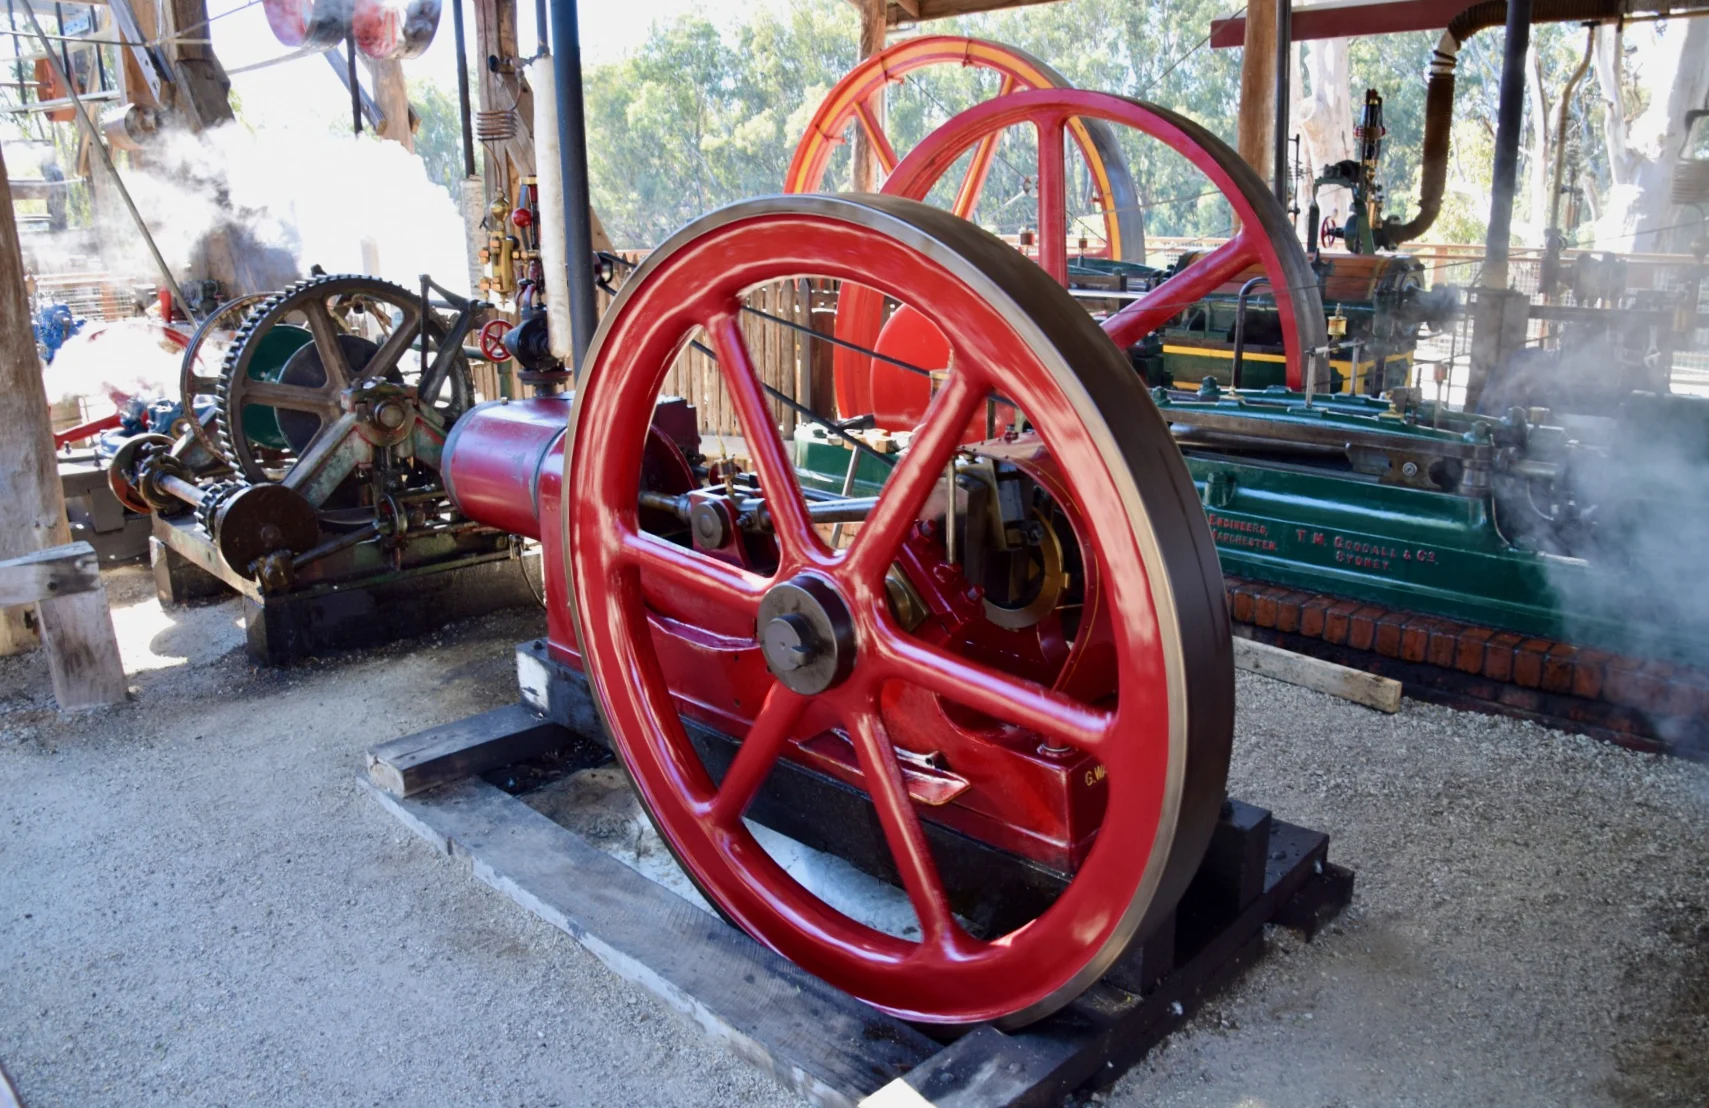 Operational steam engine billowing smoke at Echuca Discovery Centre, Echuca